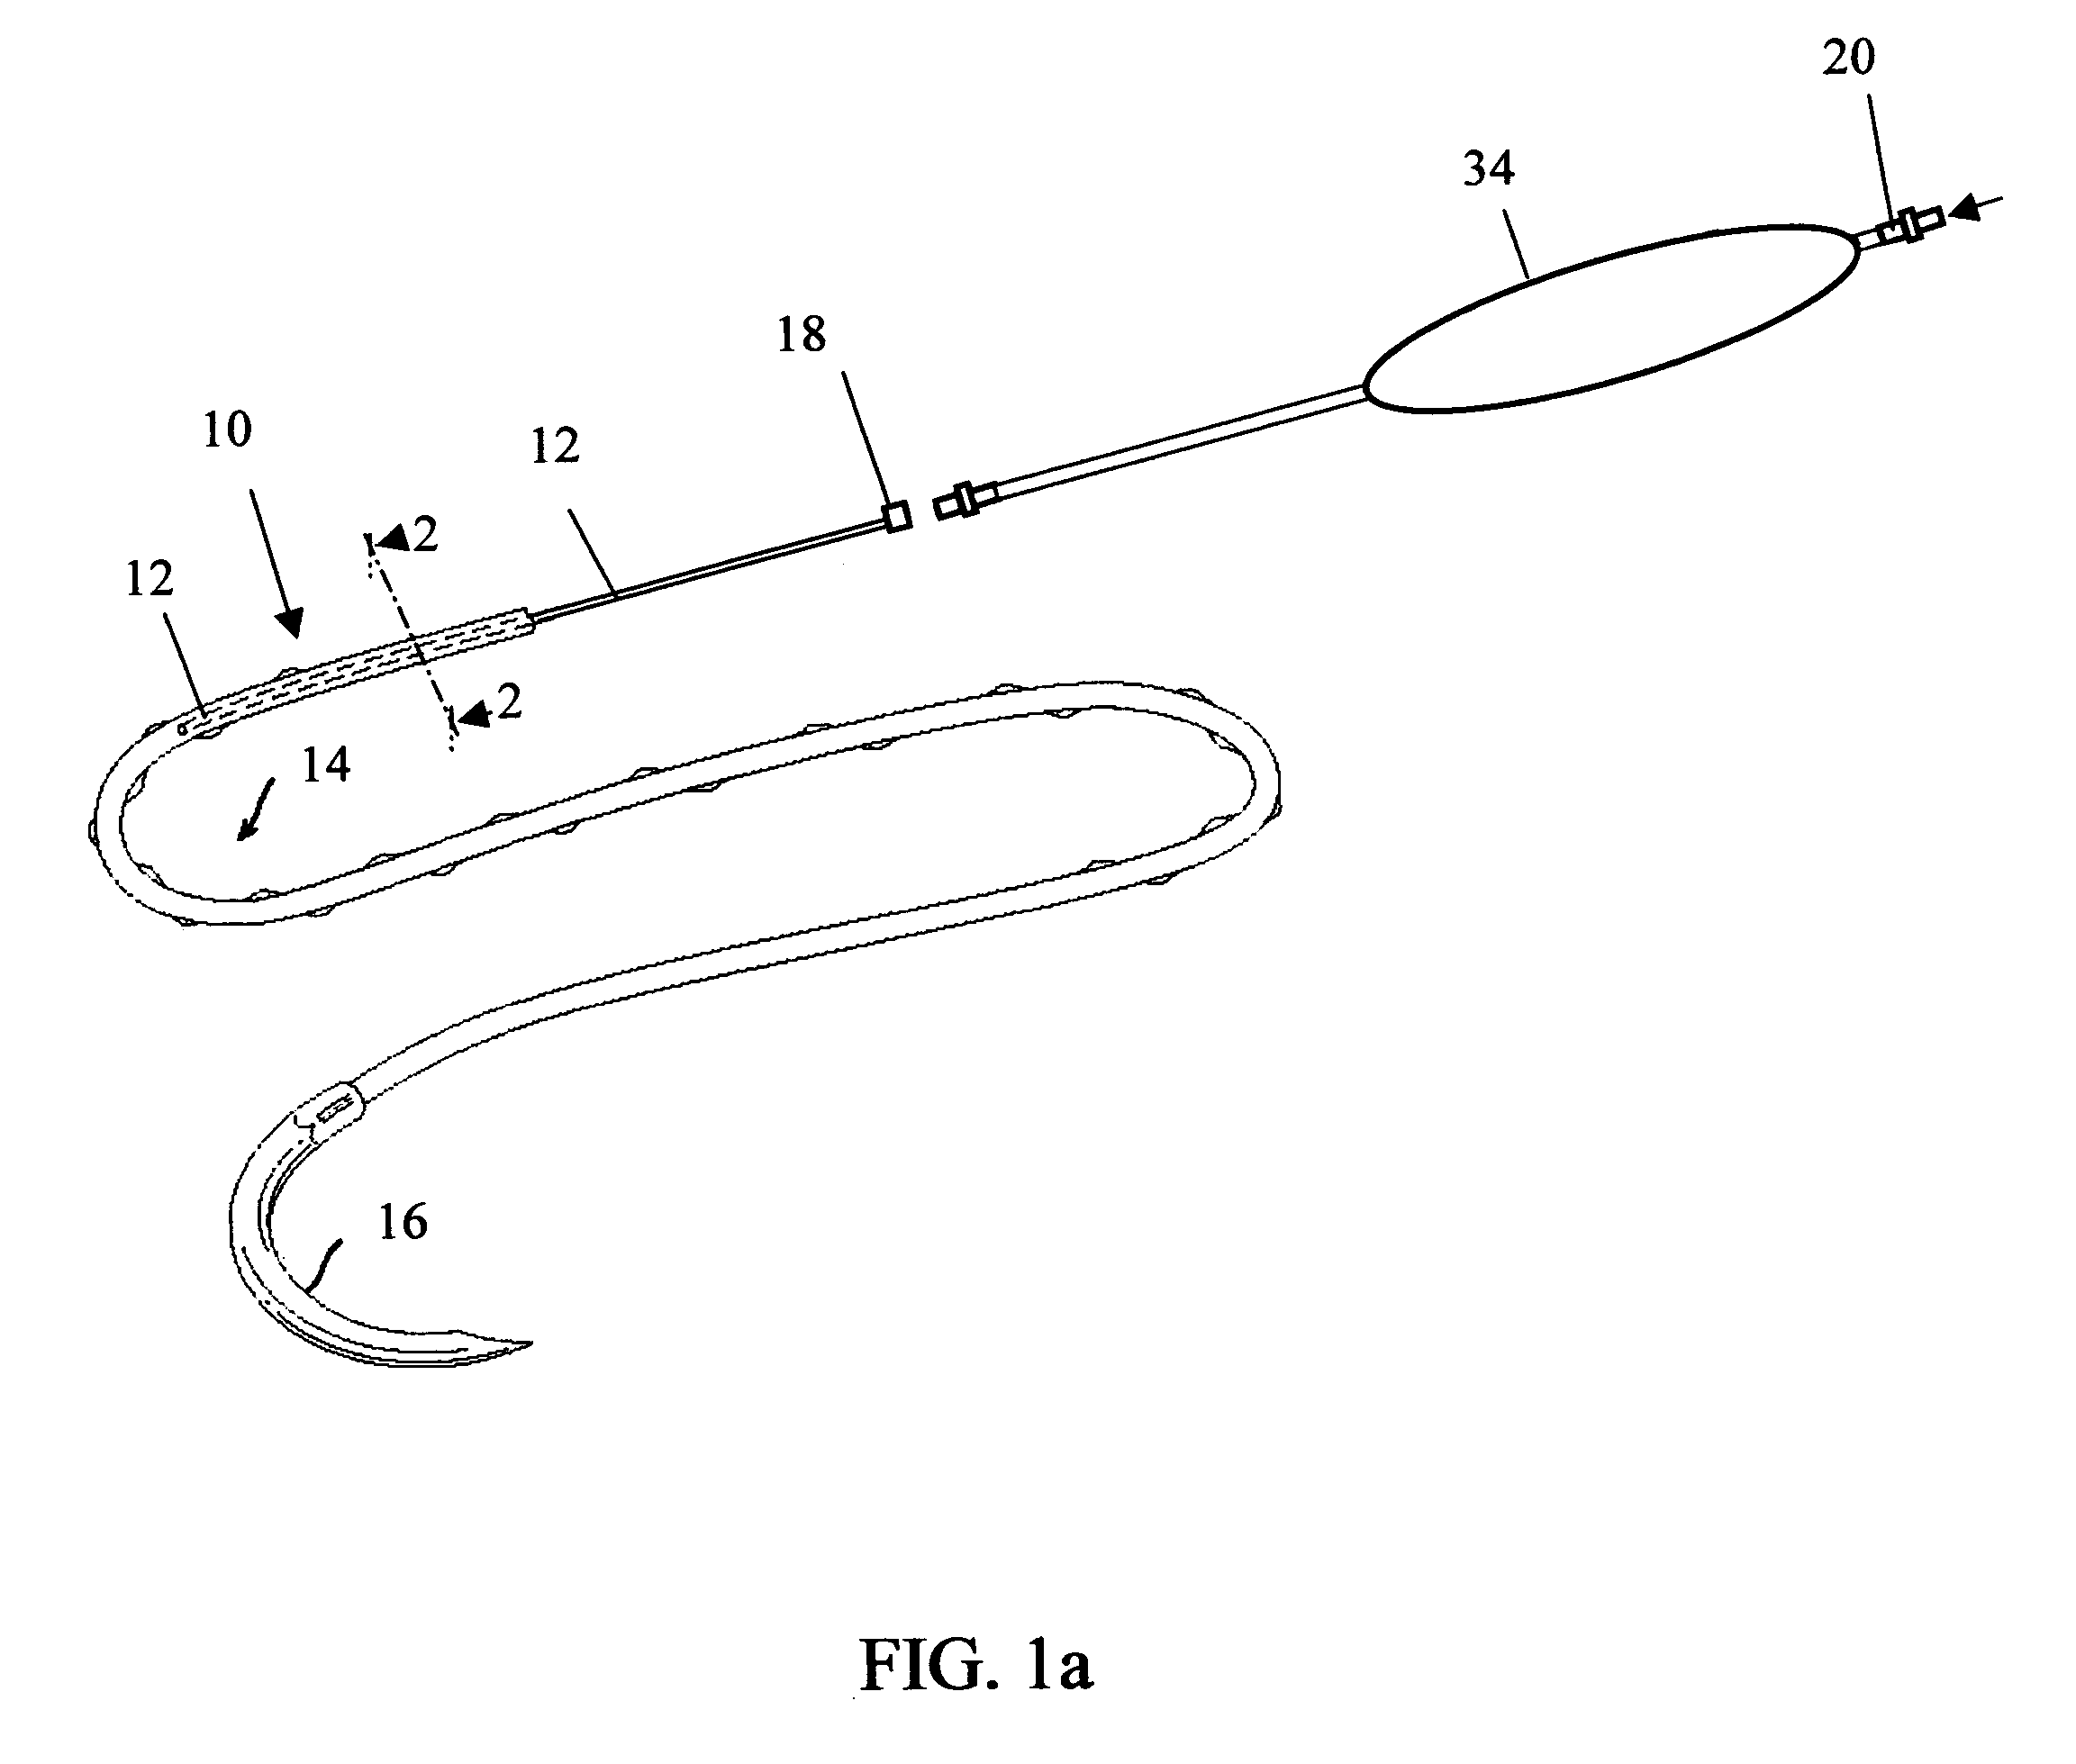 Active suture for the delivery of therapeutic fluids